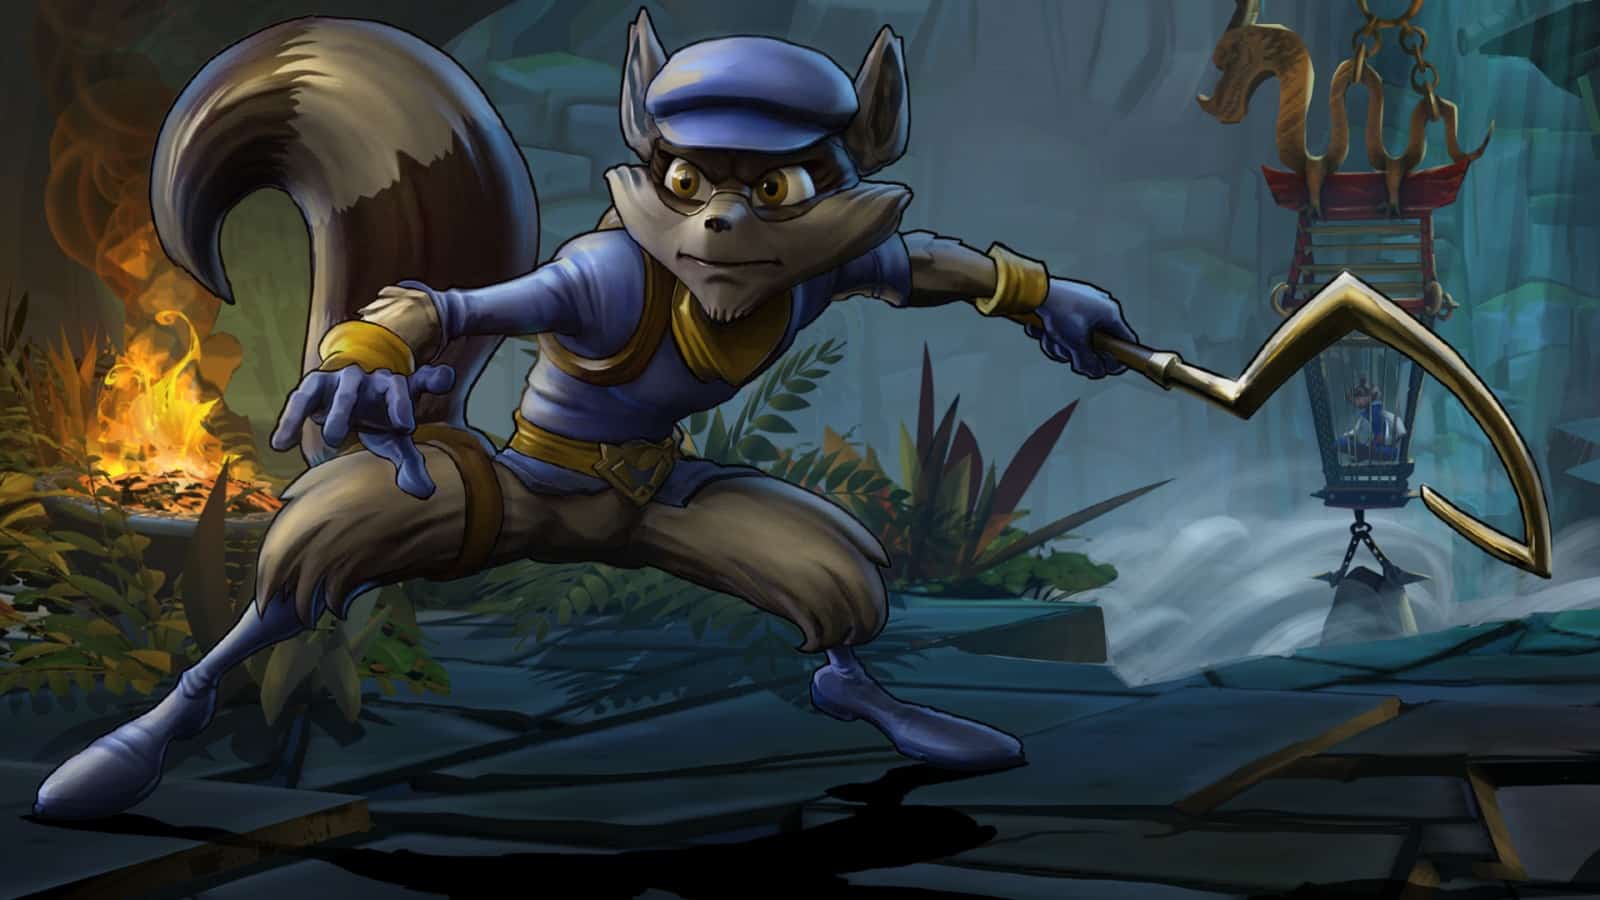 sly Cooper and infamous game series not in the works